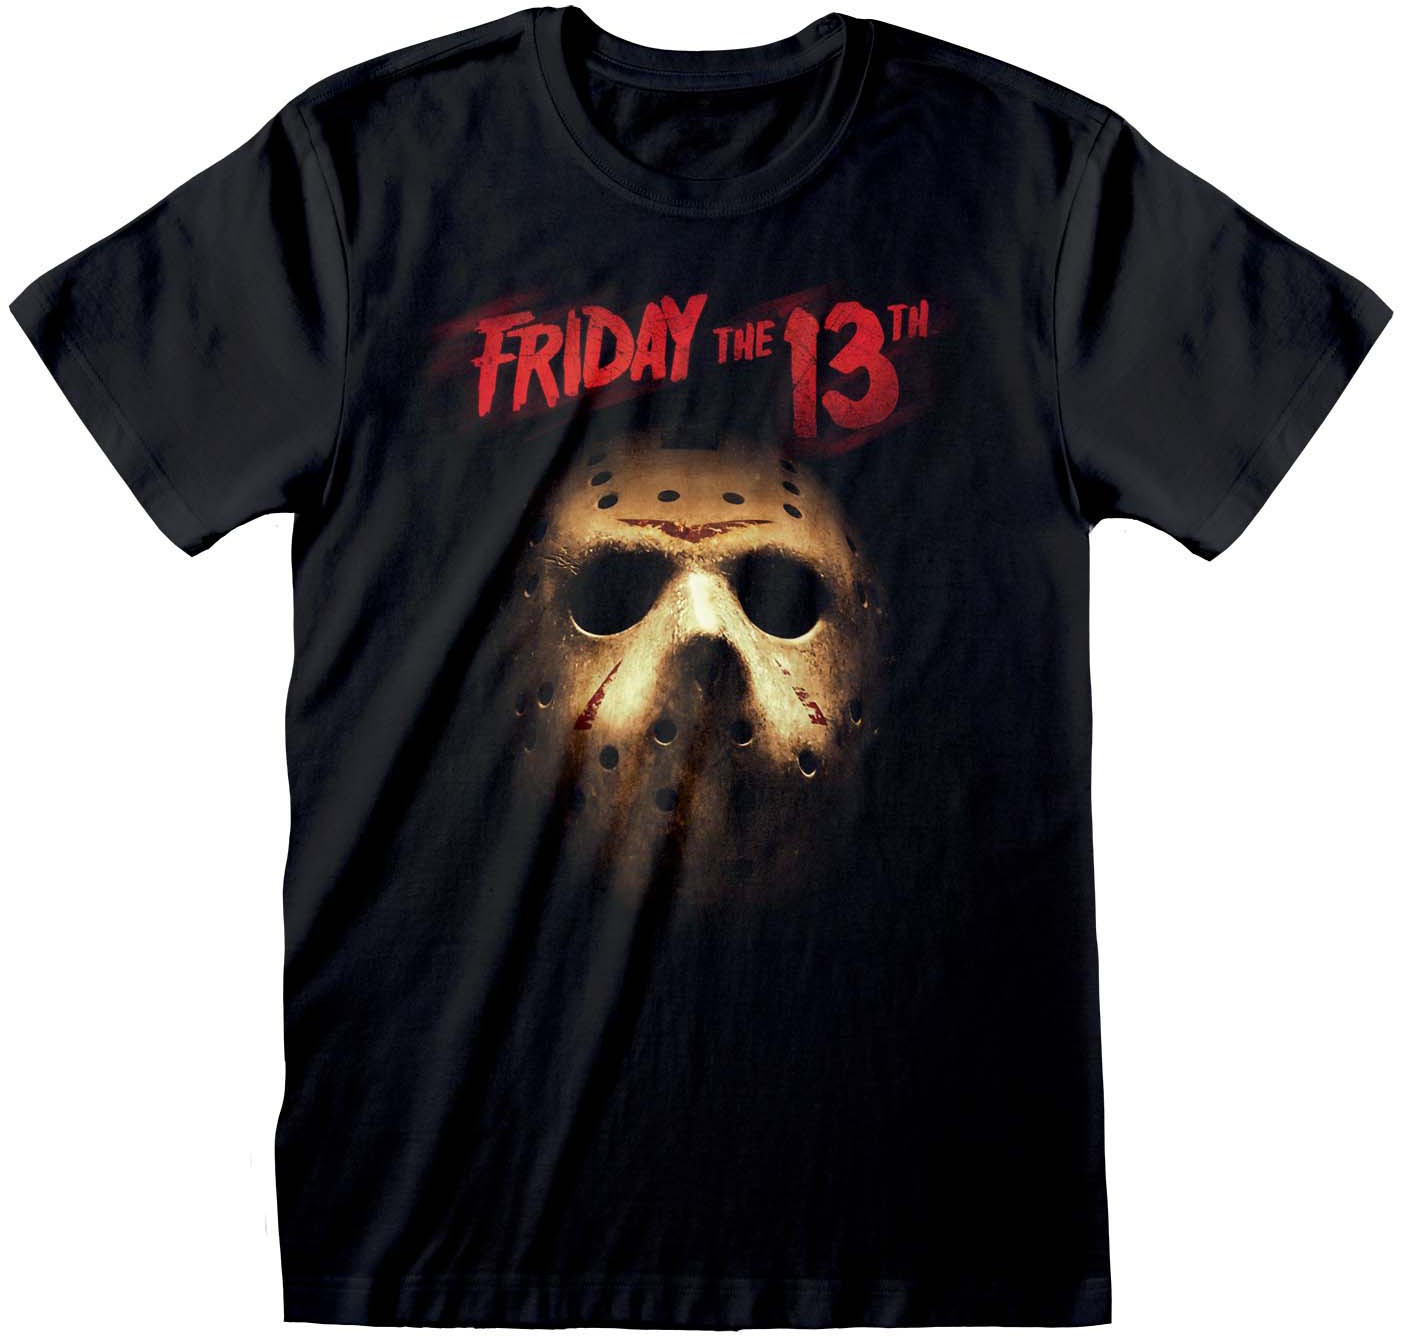 Friday The 13th - Mask T-Shirt